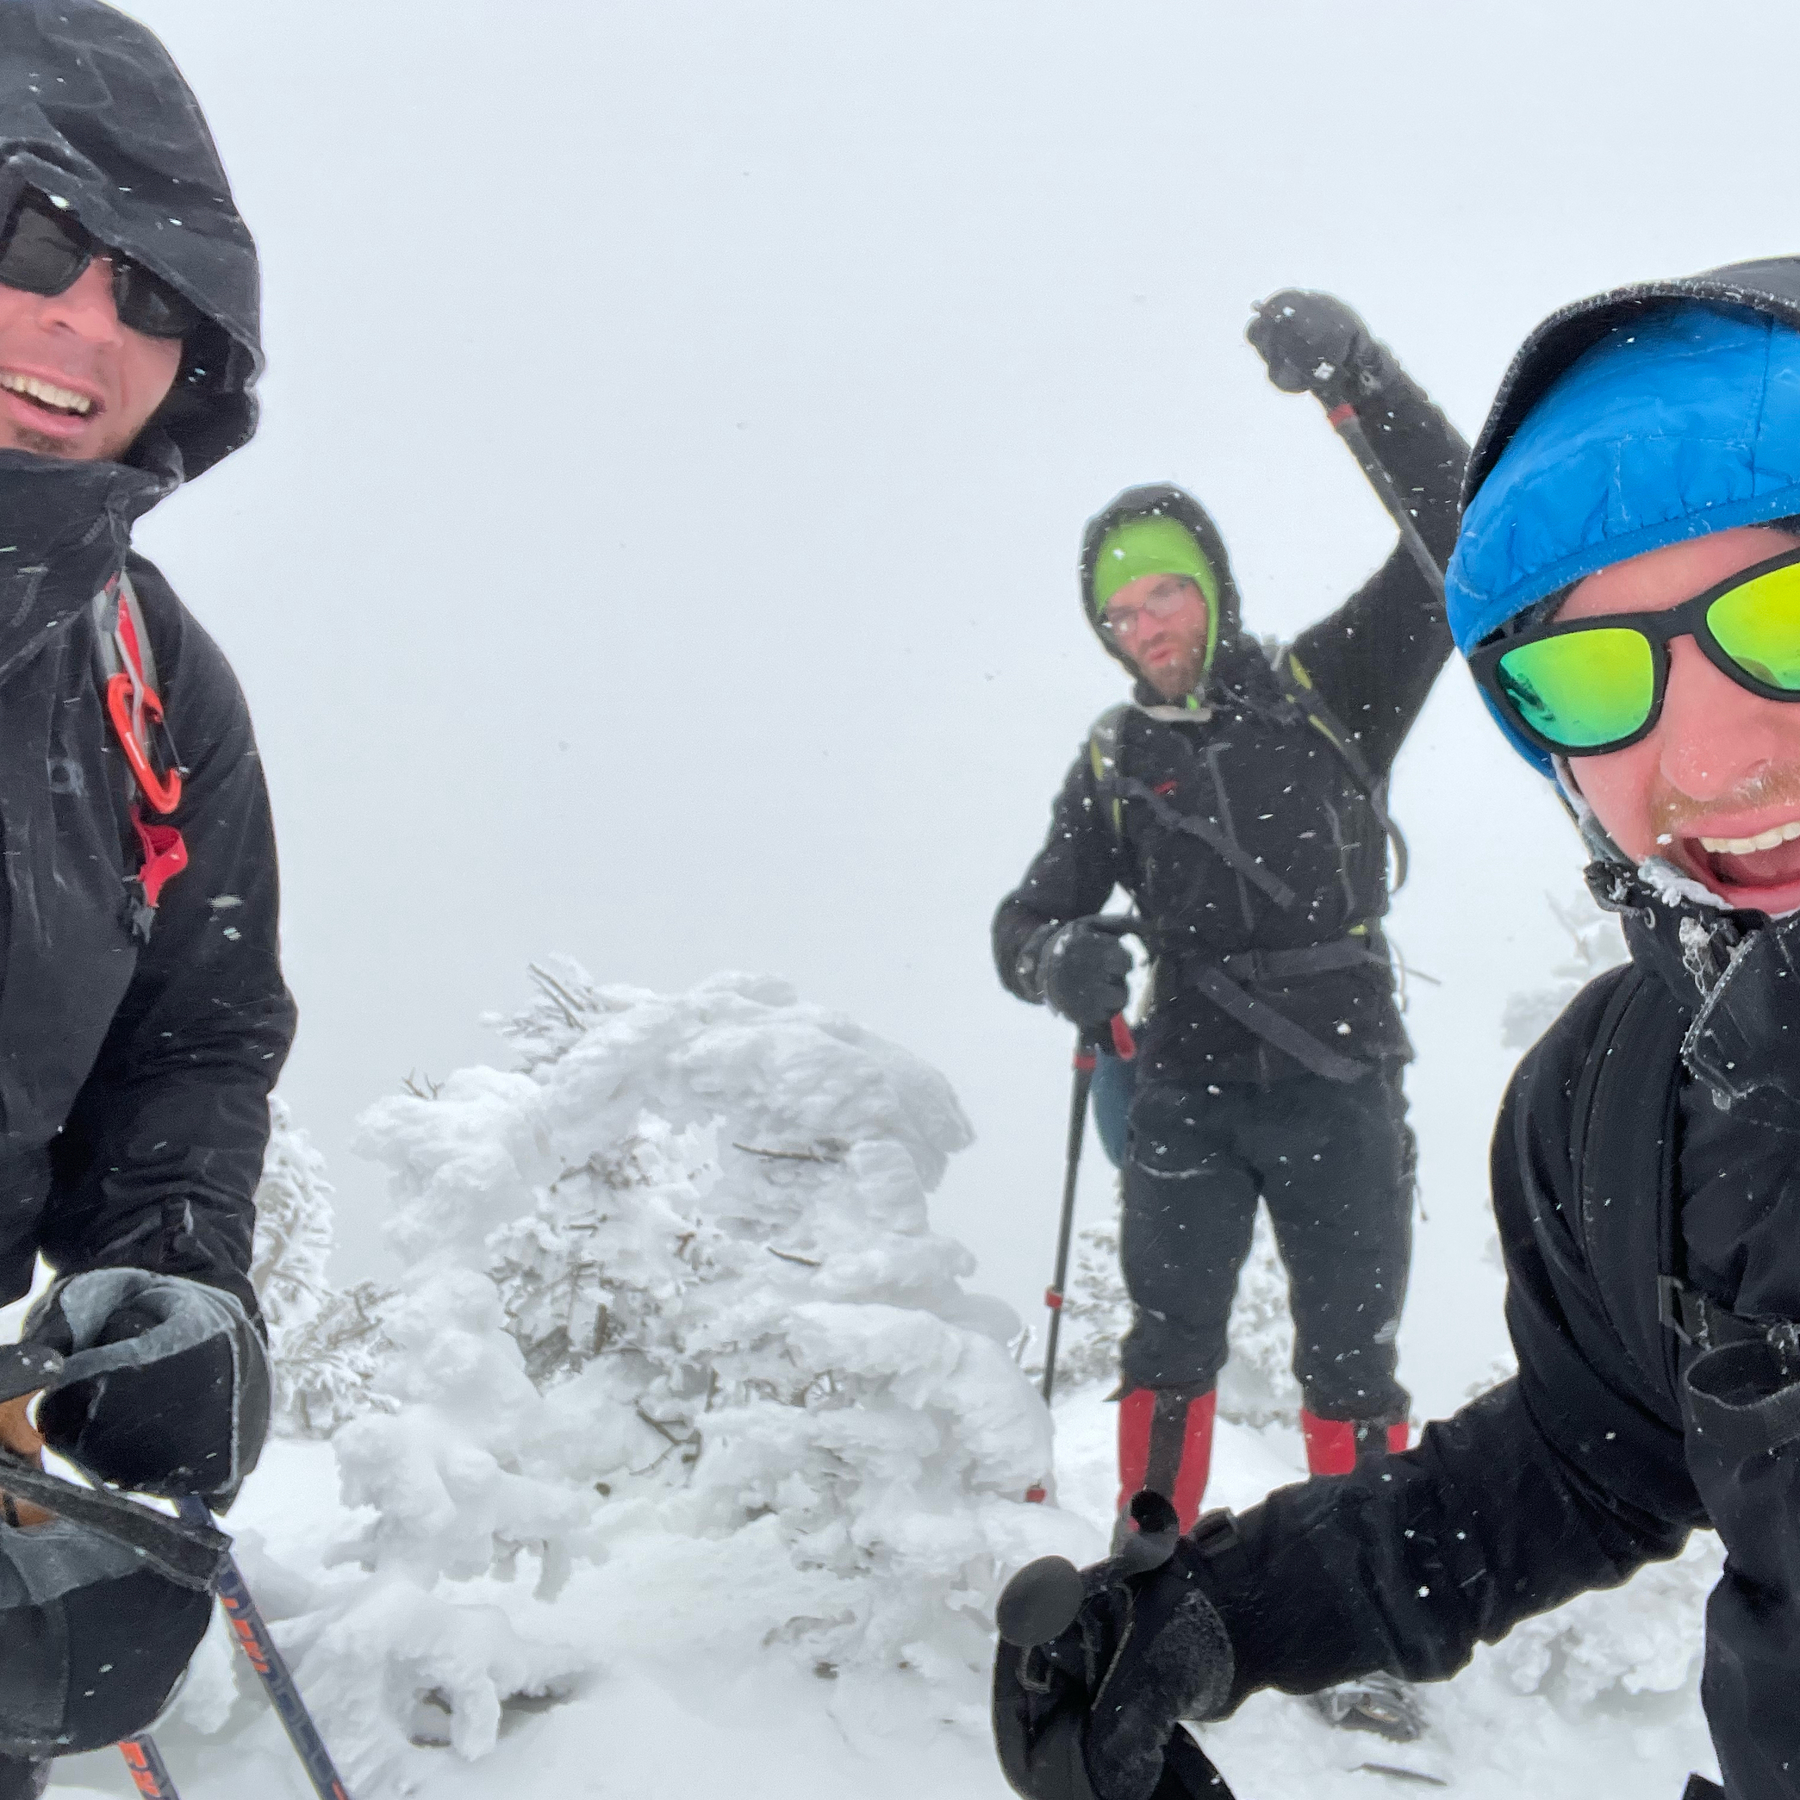 Three guys, dressed in winter gear and with snow and ice frozen on their faces, in celebration at the summit of a mountain.